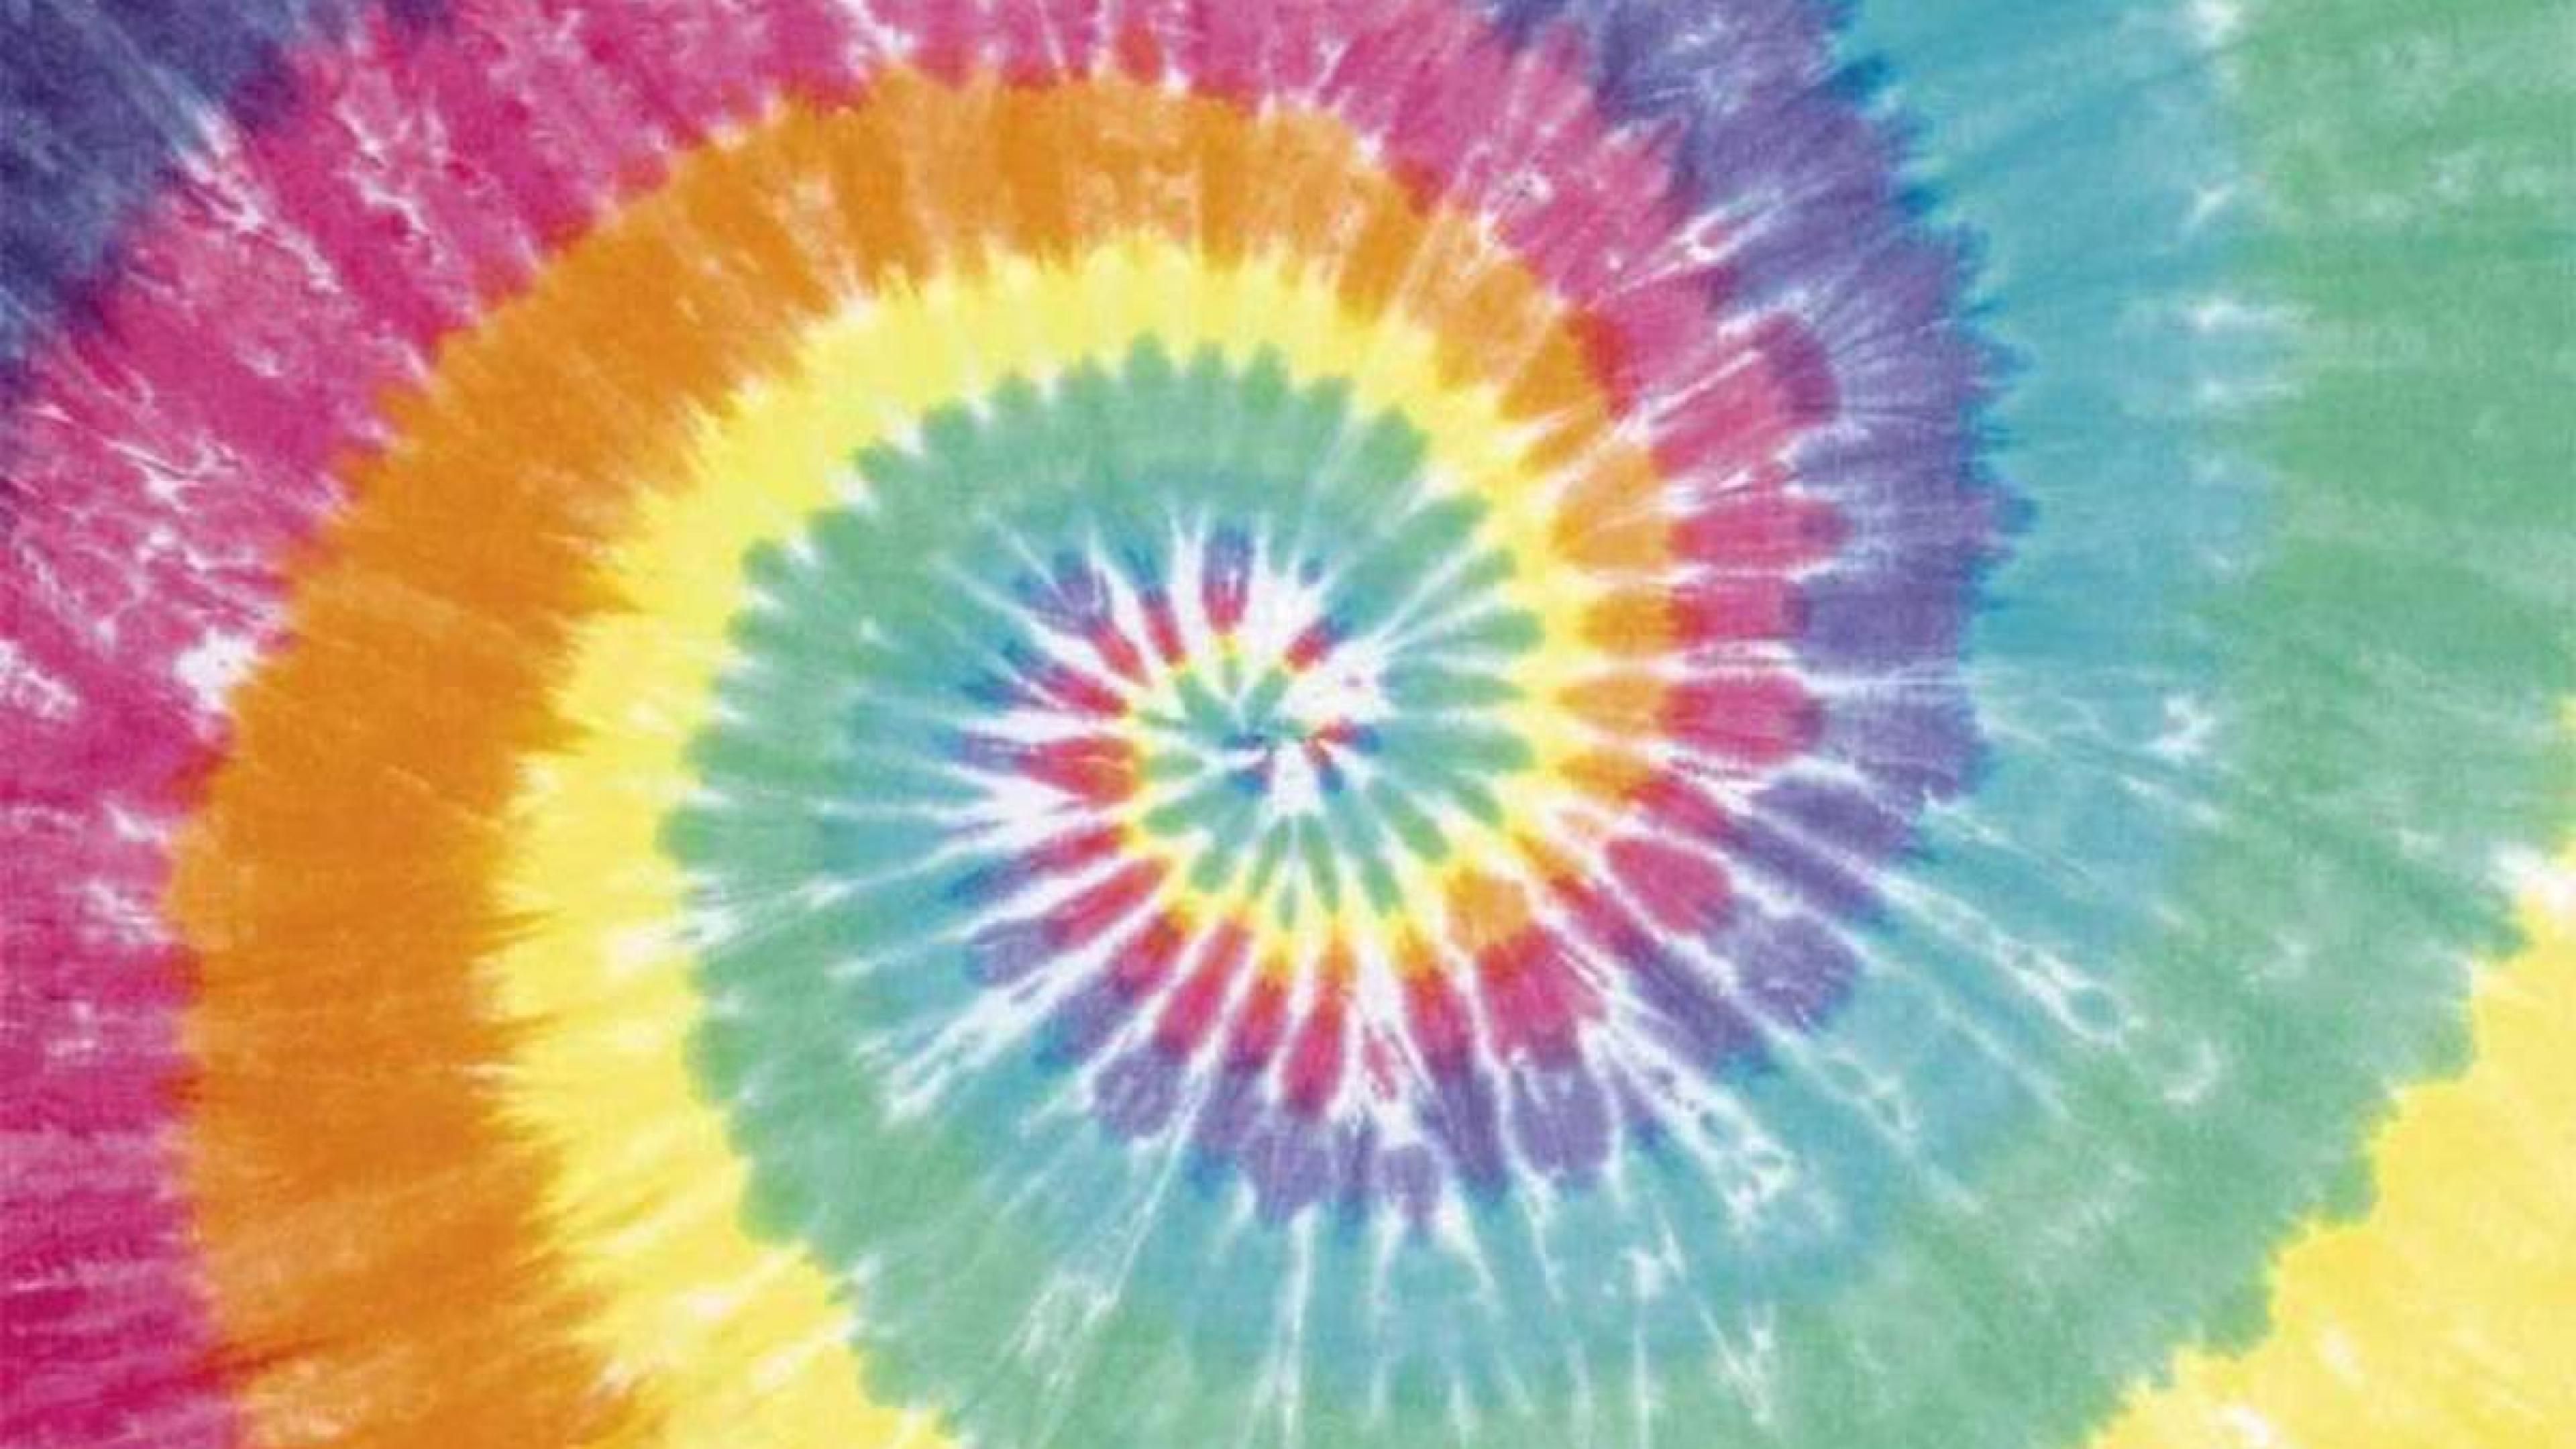 Tye Dye Wallpaper. Tie Dye Wallpaper, Tye Dye Wallpaper and Tie Dye Background